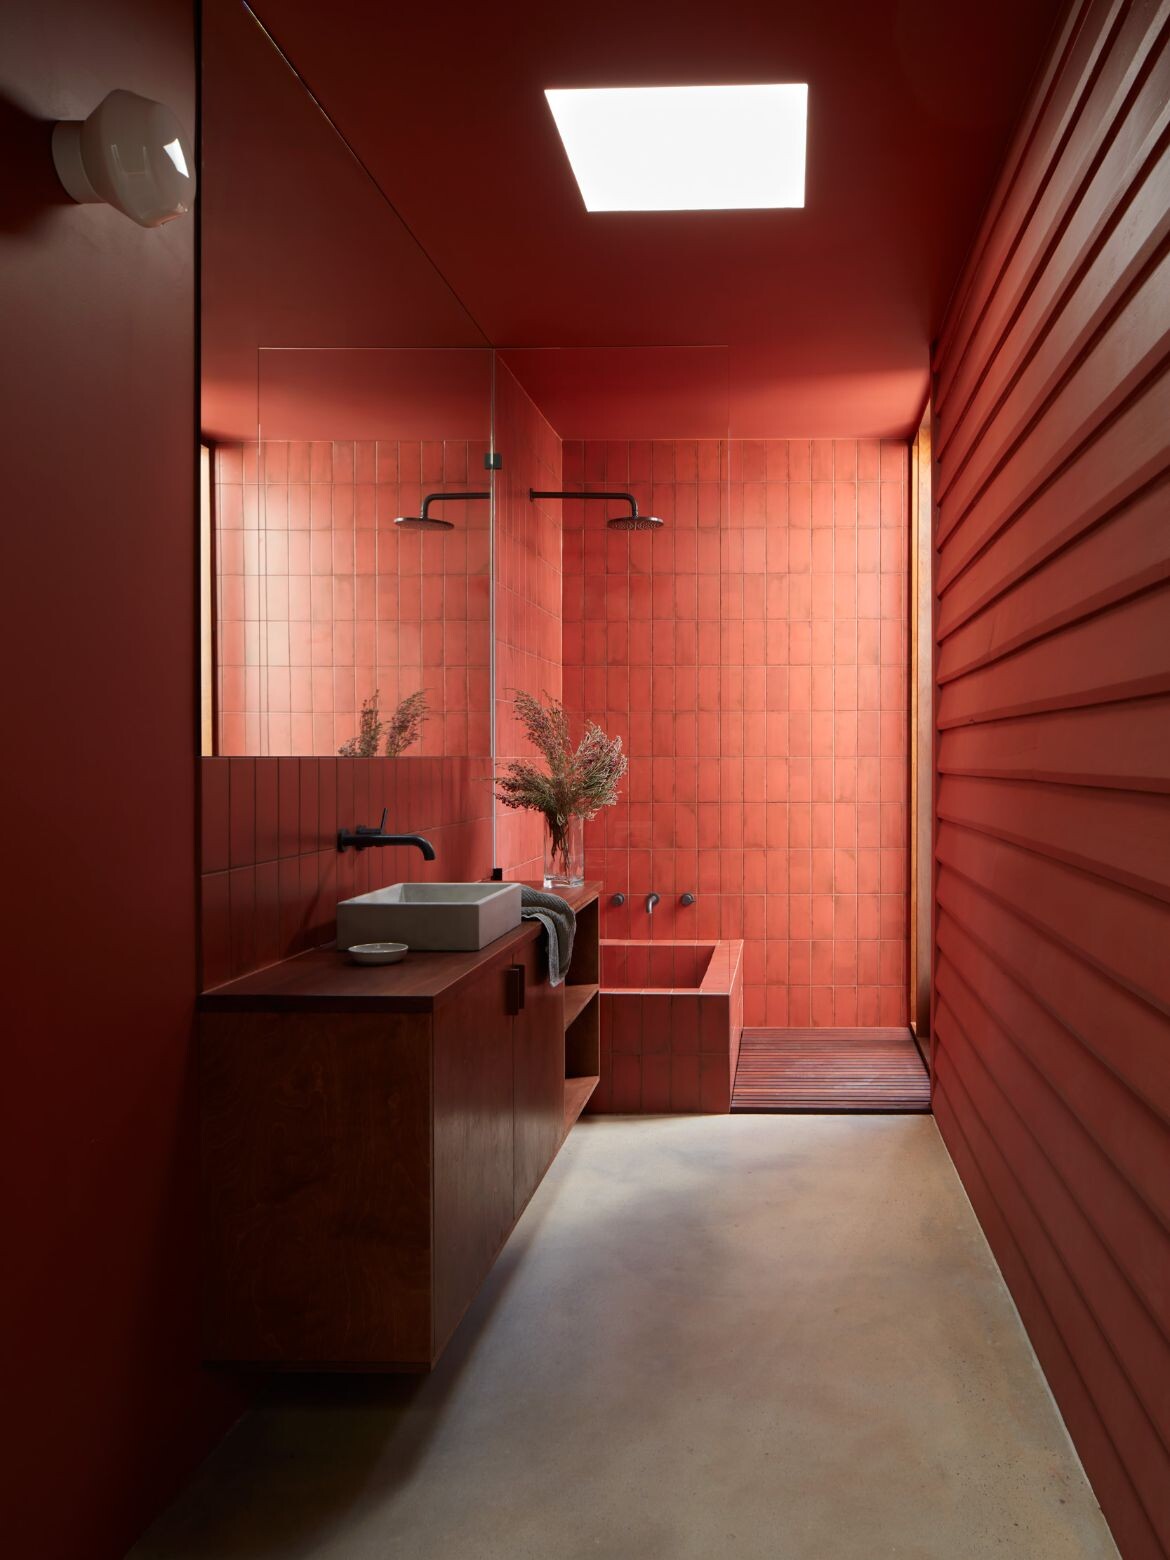 The main guest bathroom is lined with a rich ochre tile